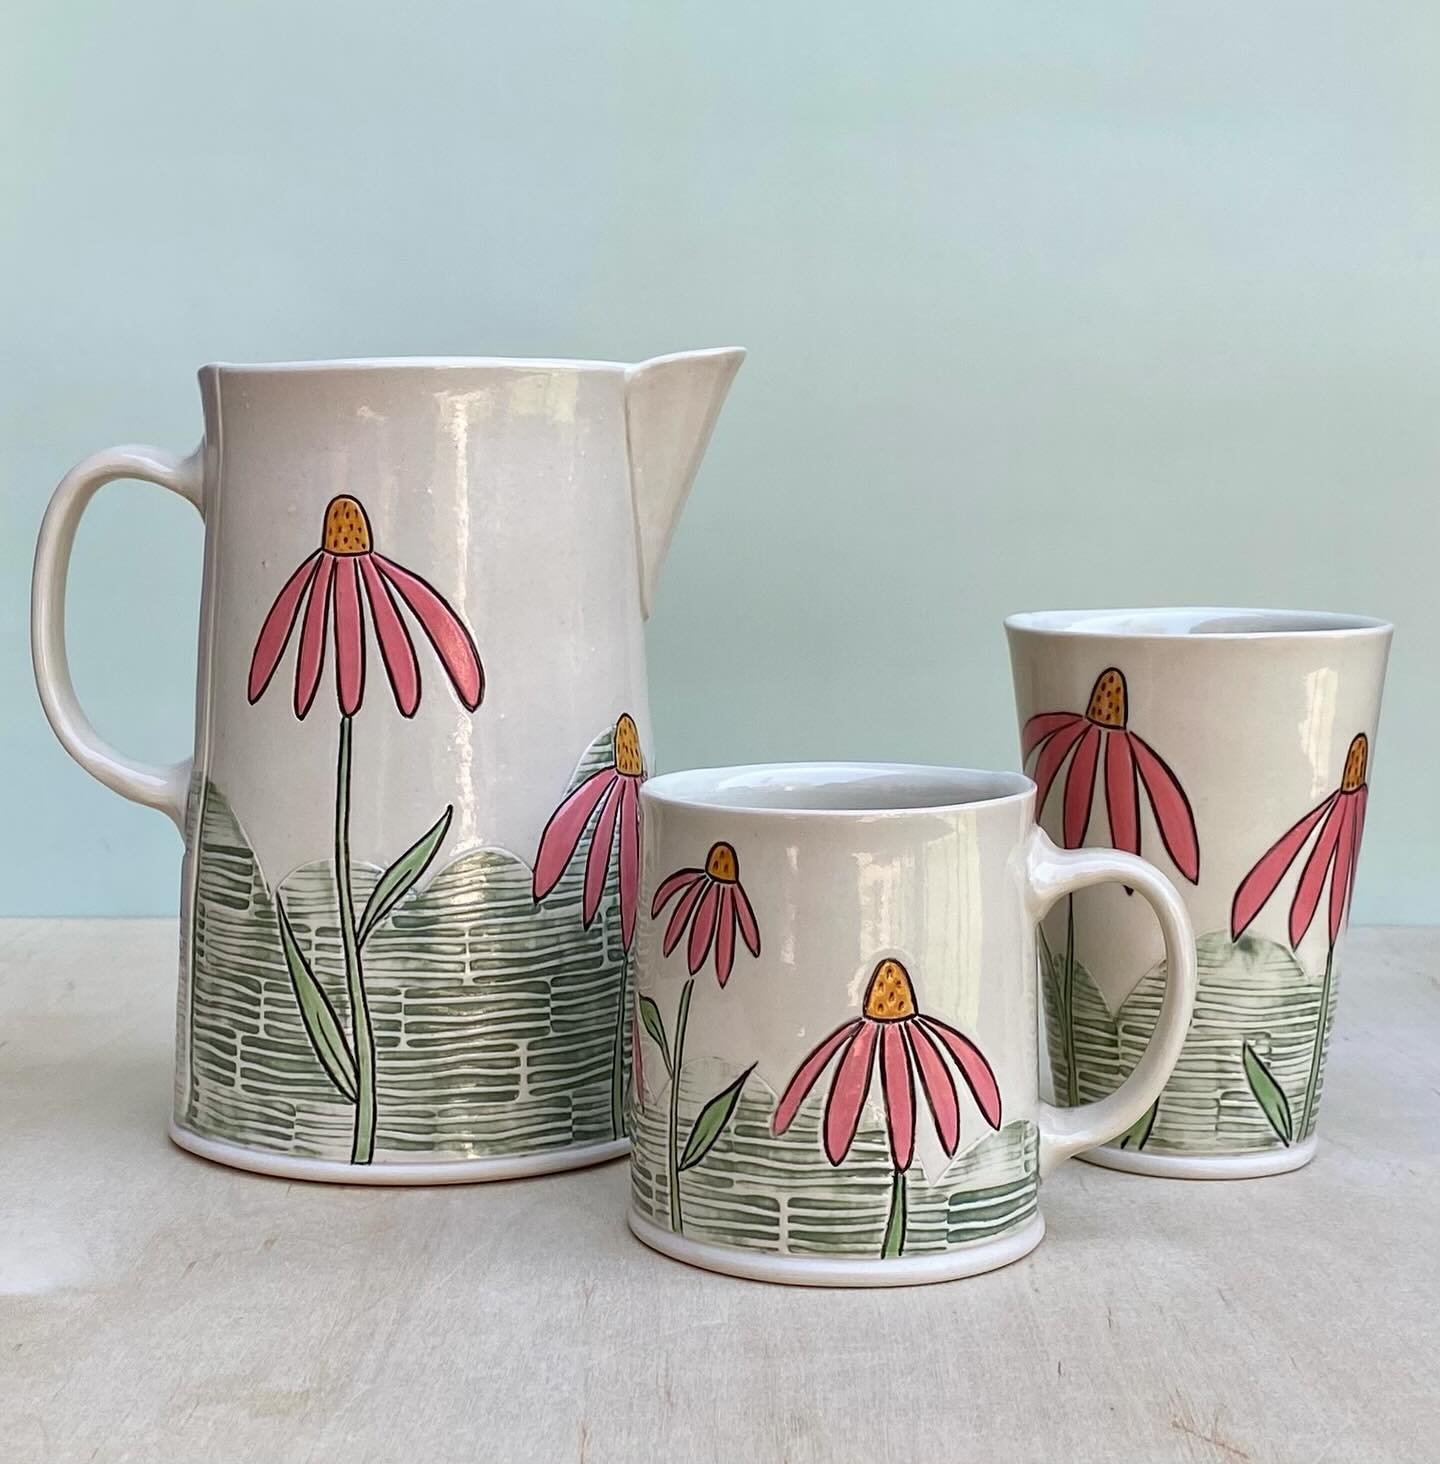 Echinacea pots. 💗

I&rsquo;ve been obsessed with painting coneflowers for years now. They have such a satisfying shape and lovely colors. 

It&rsquo;s a bonus that Tennessee has its own coneflowers, a member of the genus echinacea, that was lifted o